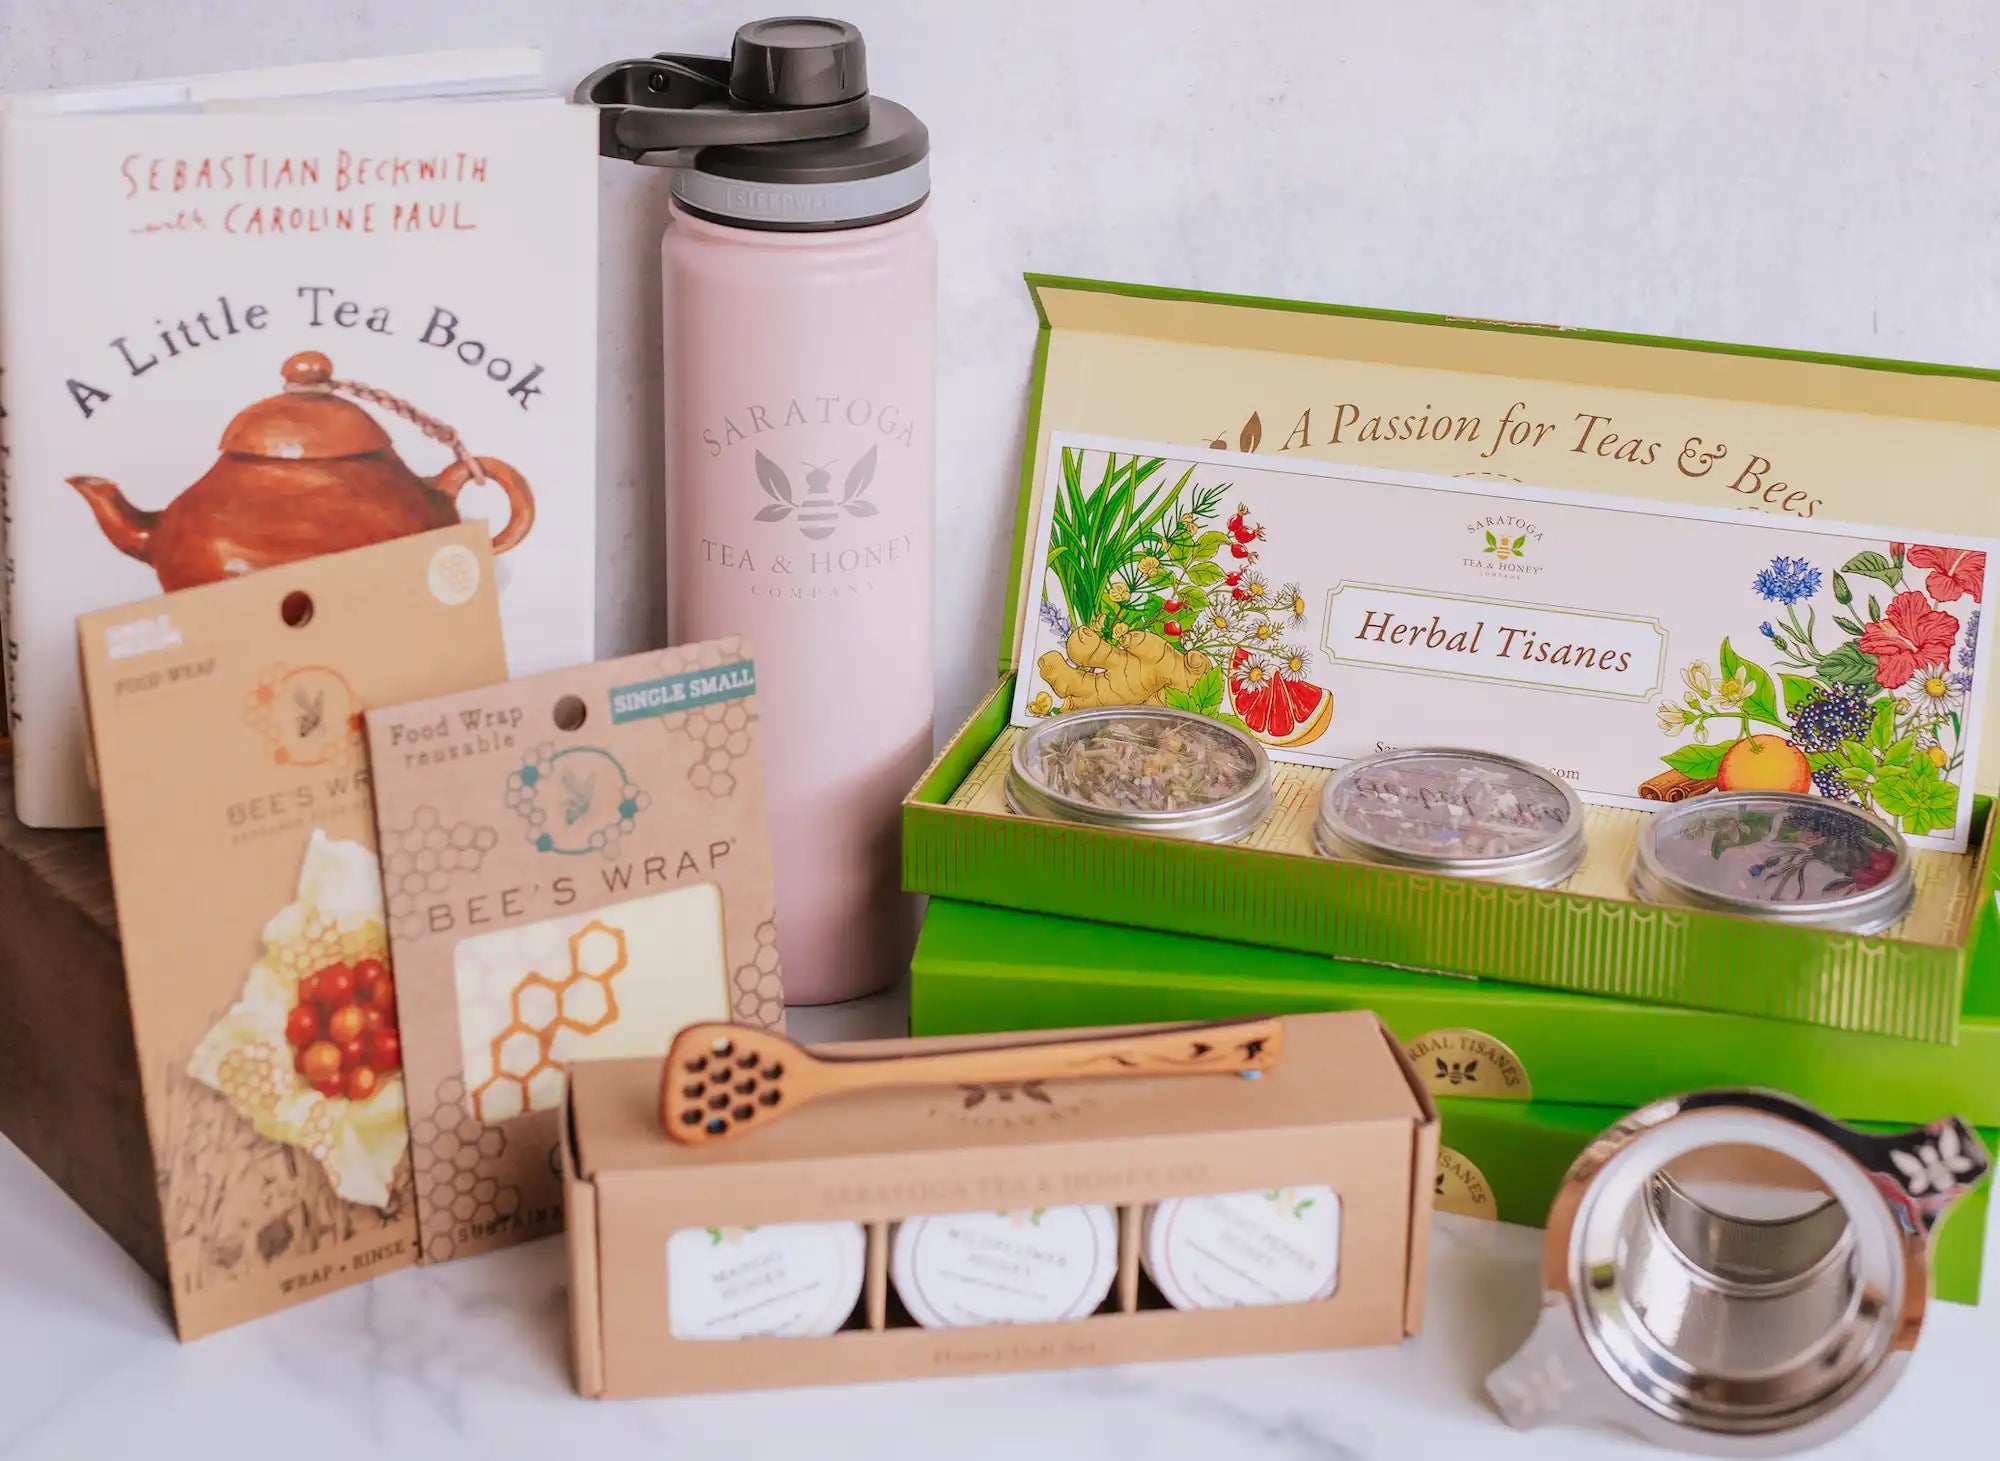 collection of tea and honey gifts including tea and honey sample sets, beeswax products, and tea tumblers